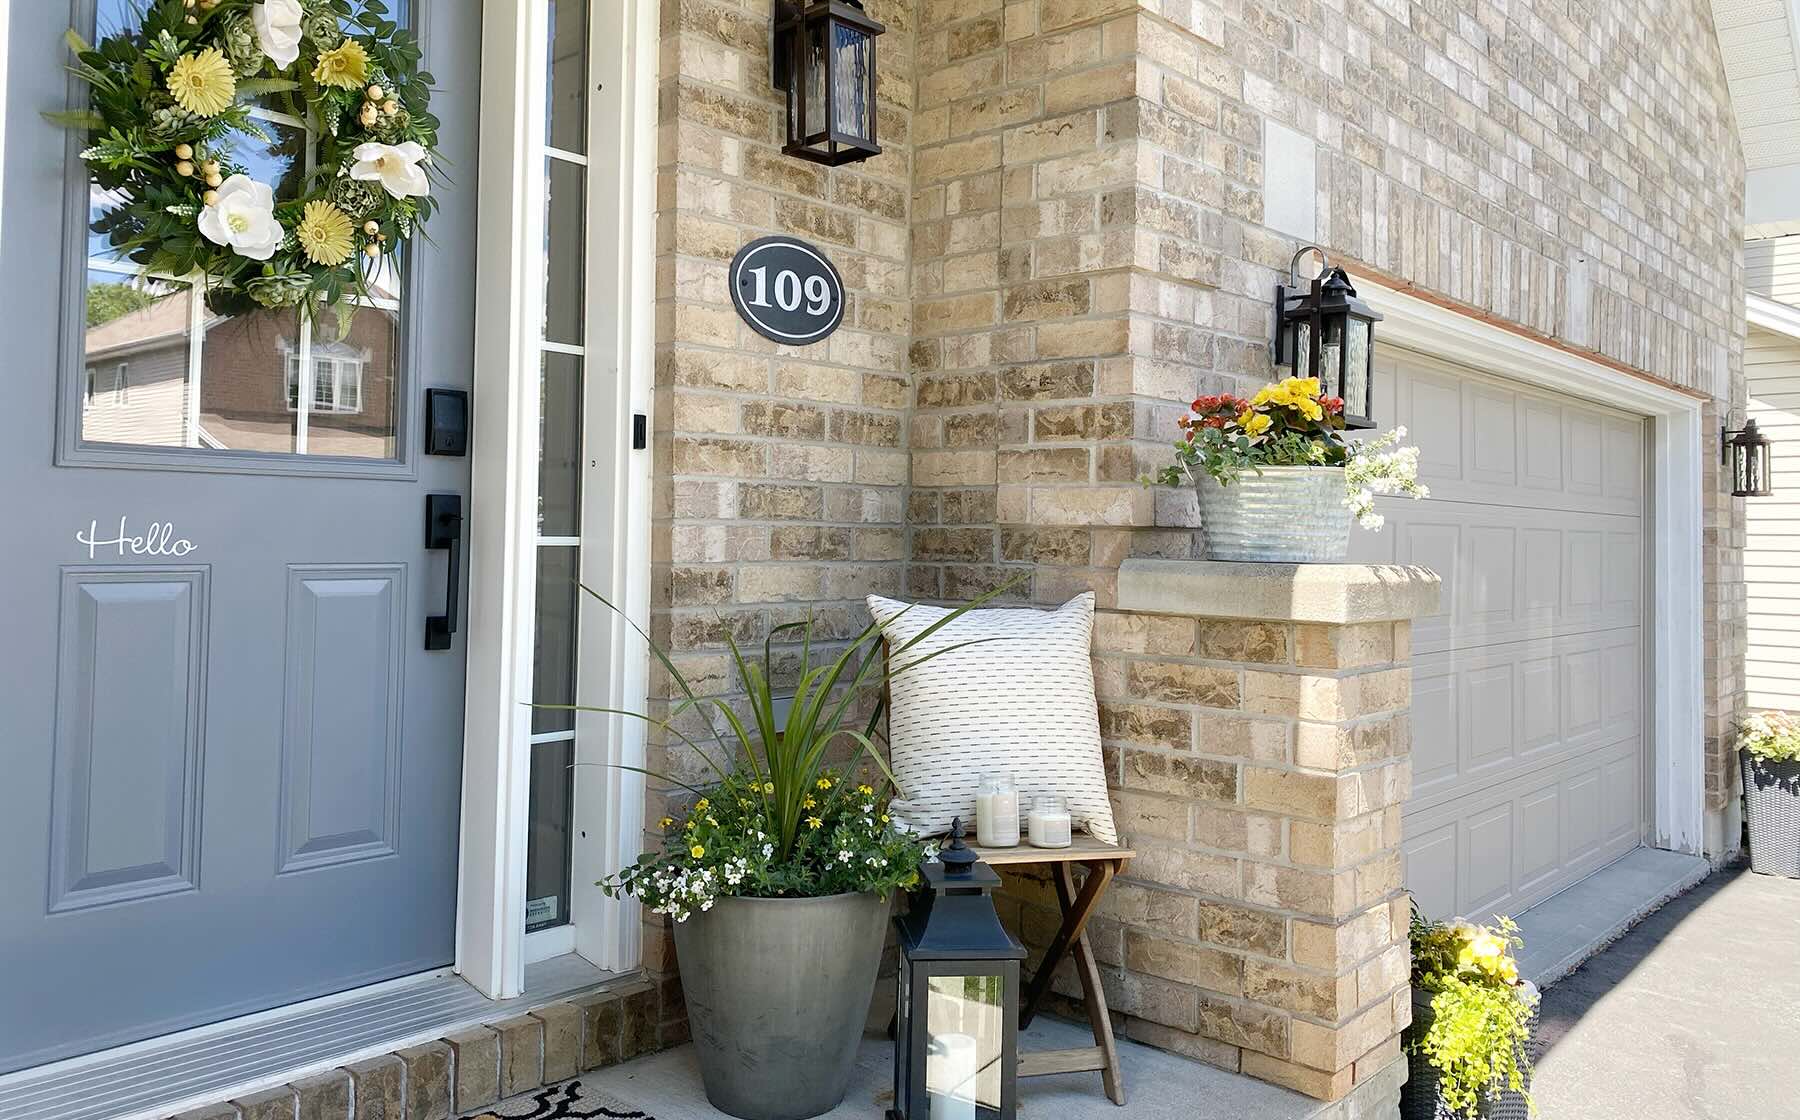 How To Clean A Brick Porch